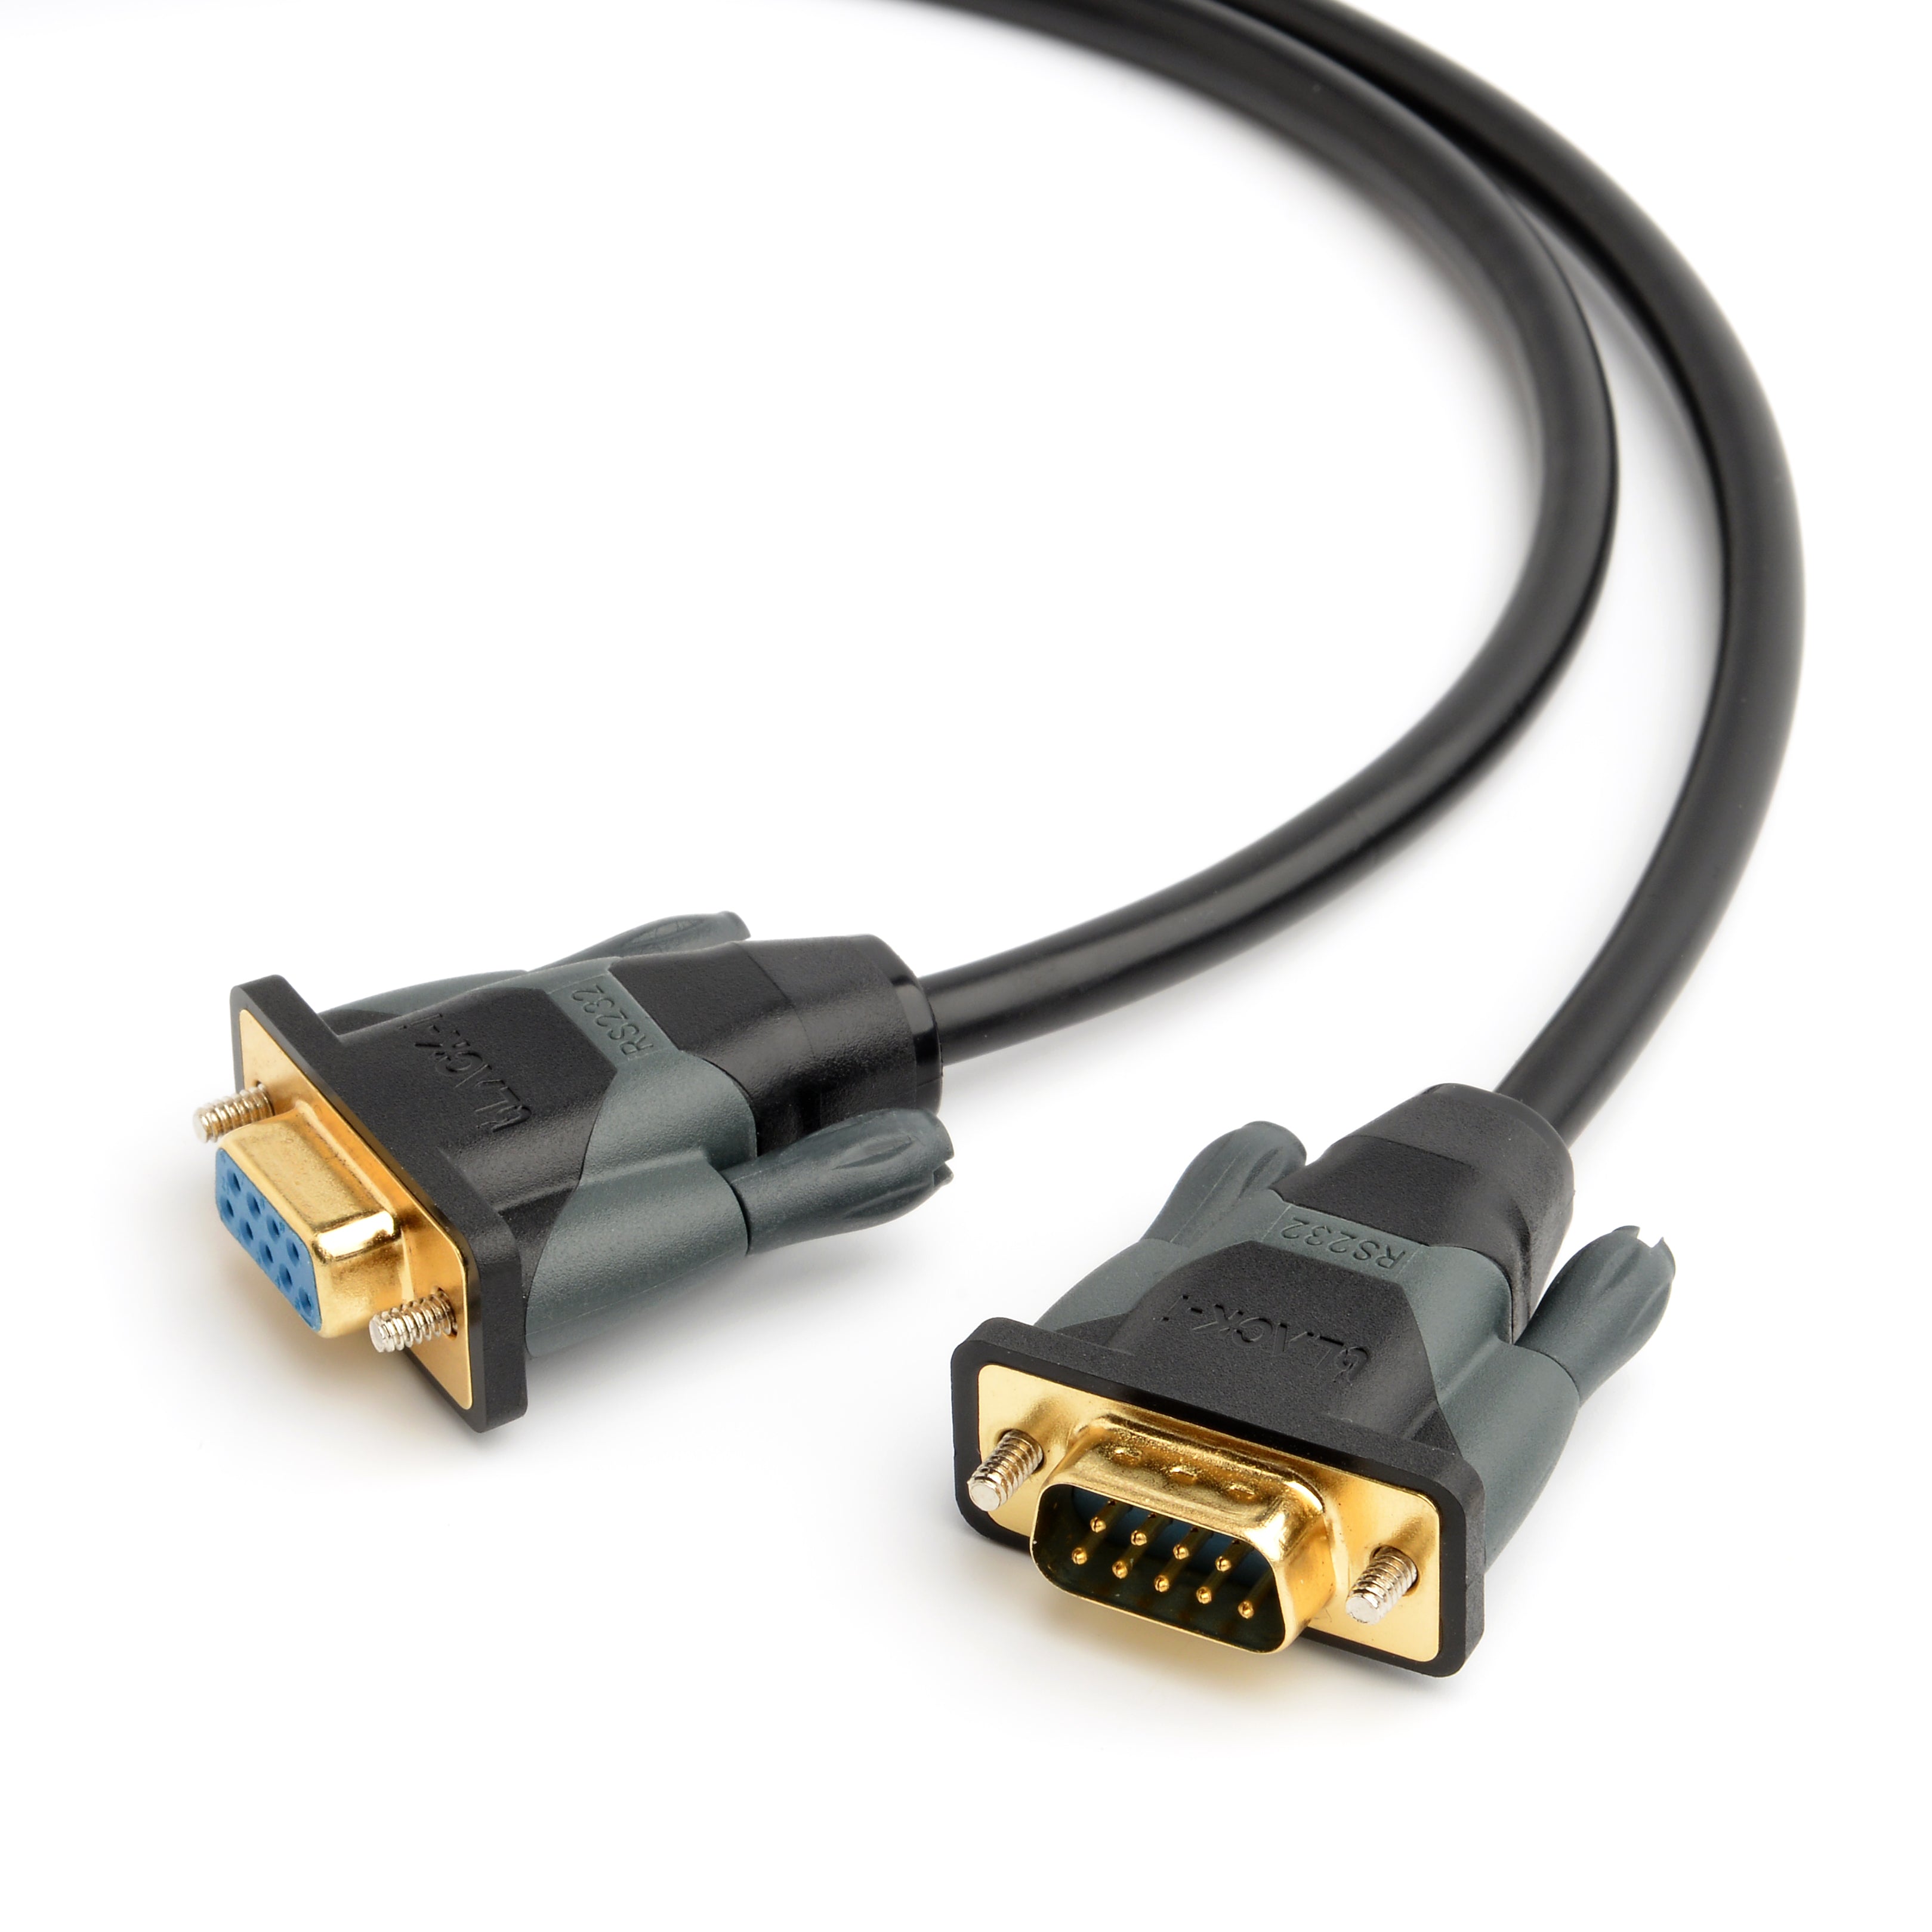 Black-i Rs232 Male to female serial cable 